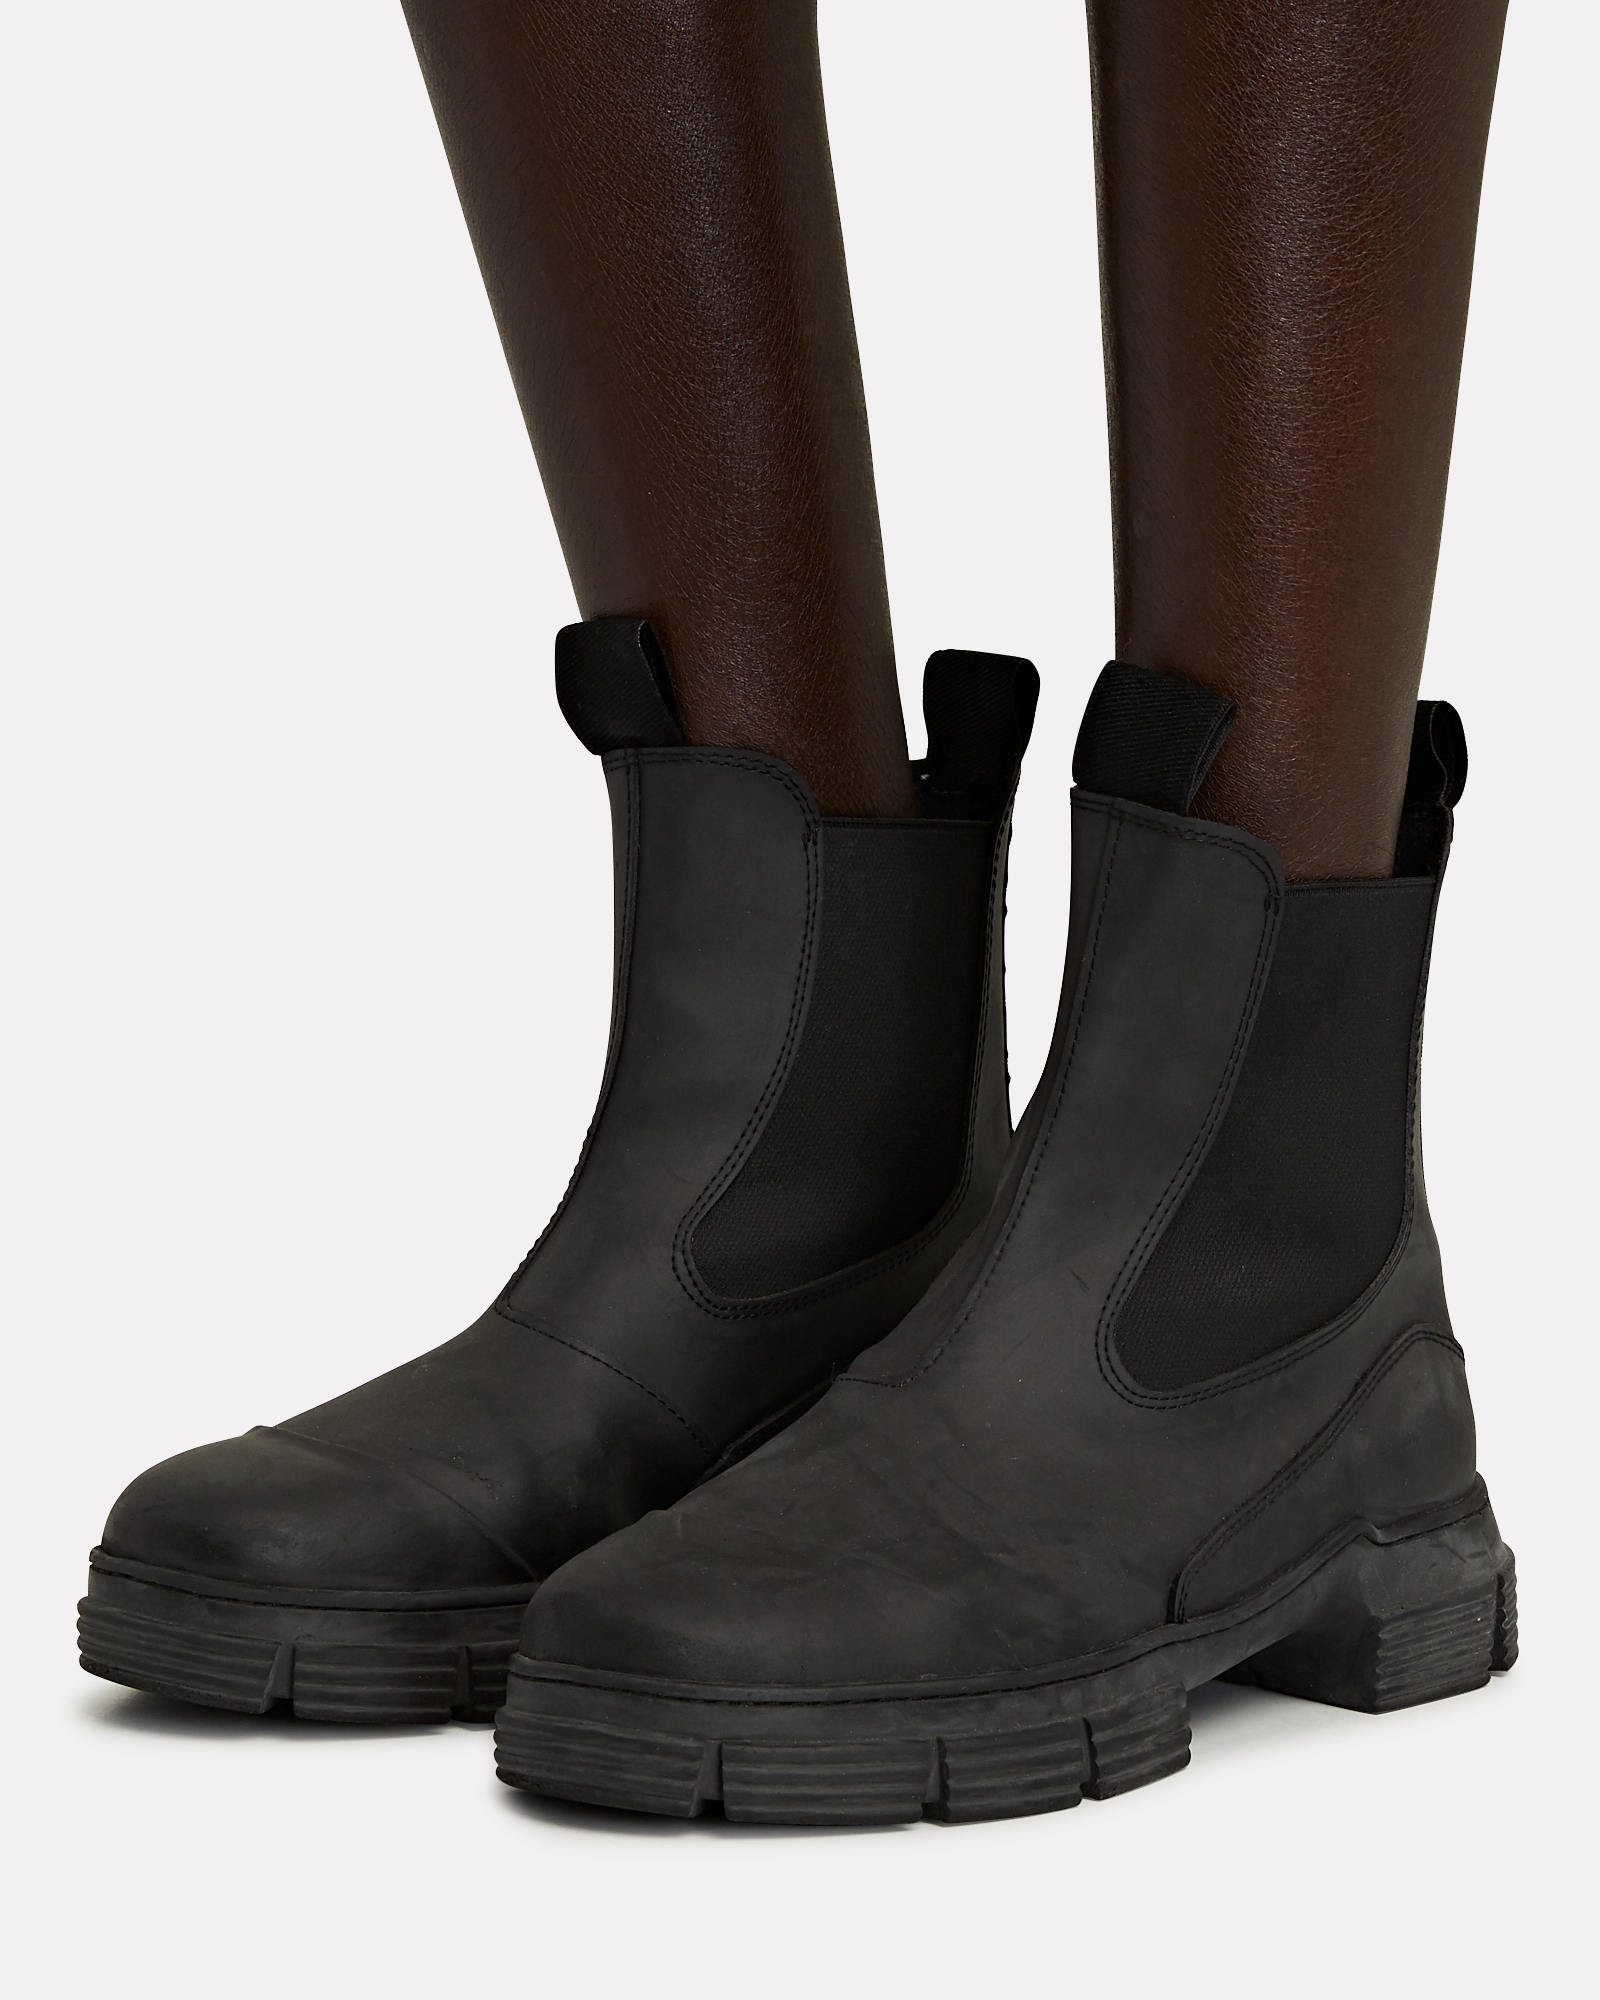 GANNI Recycled Rubber City Boots | INTERMIX®